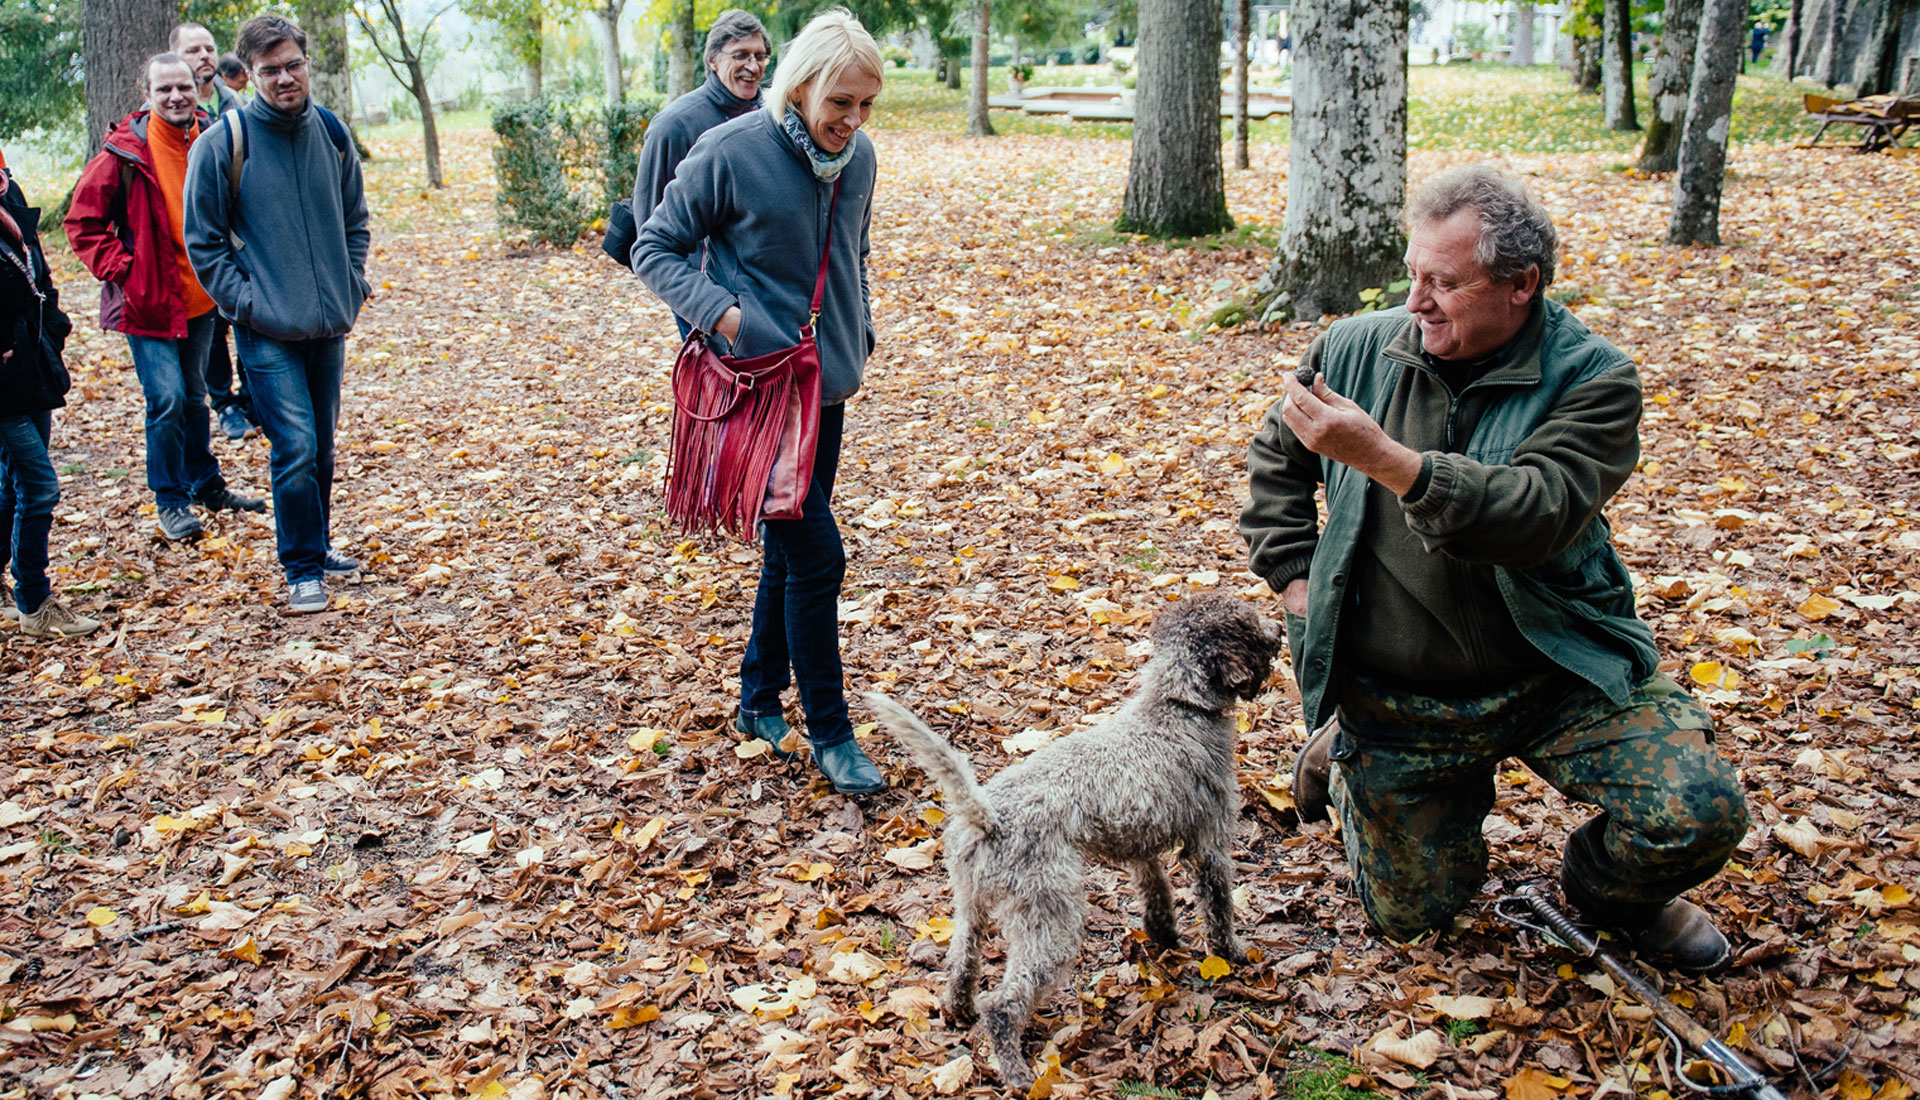 Truffle hunting: Only a simulation, but you might get lucky